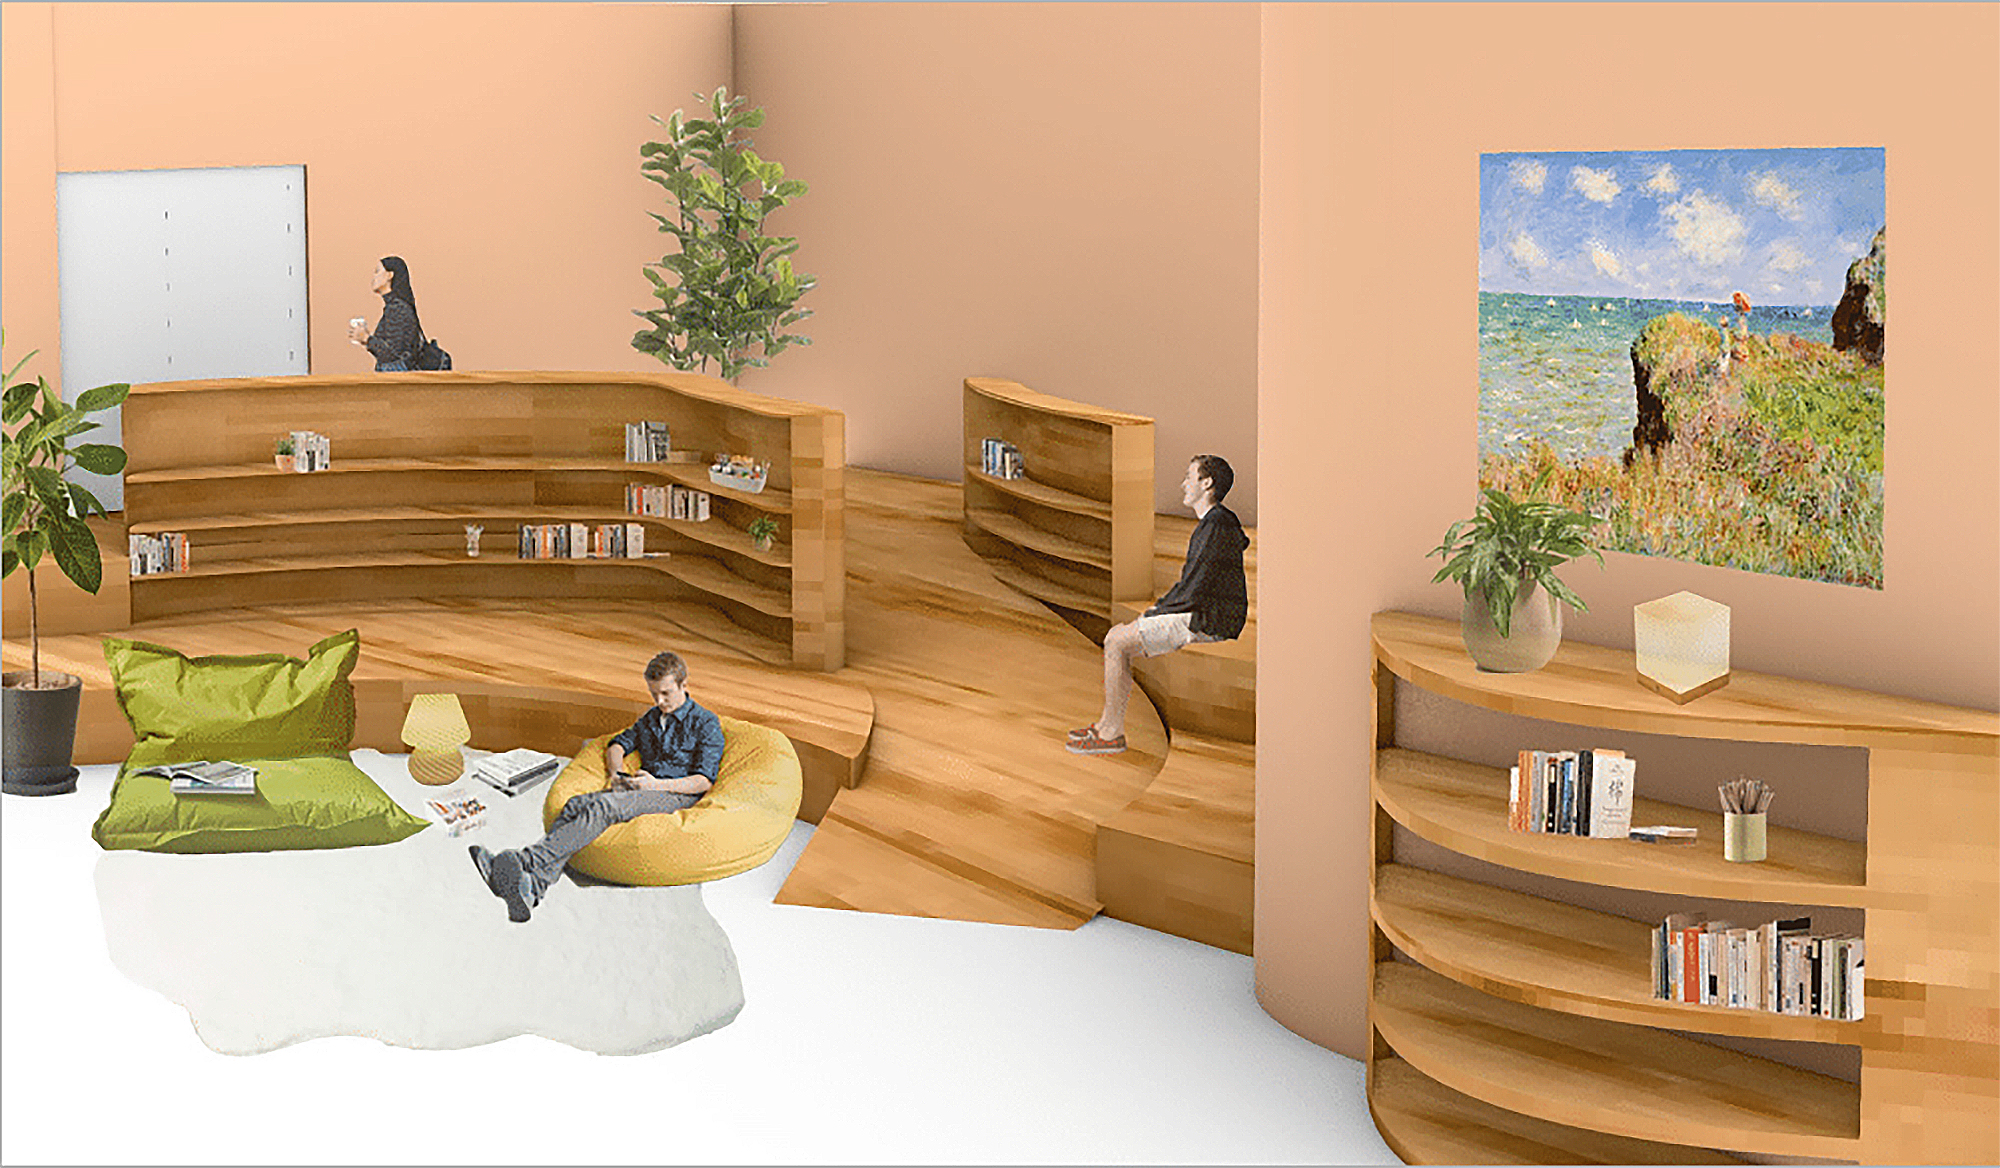 harm reduction center design by Mary Byrnes